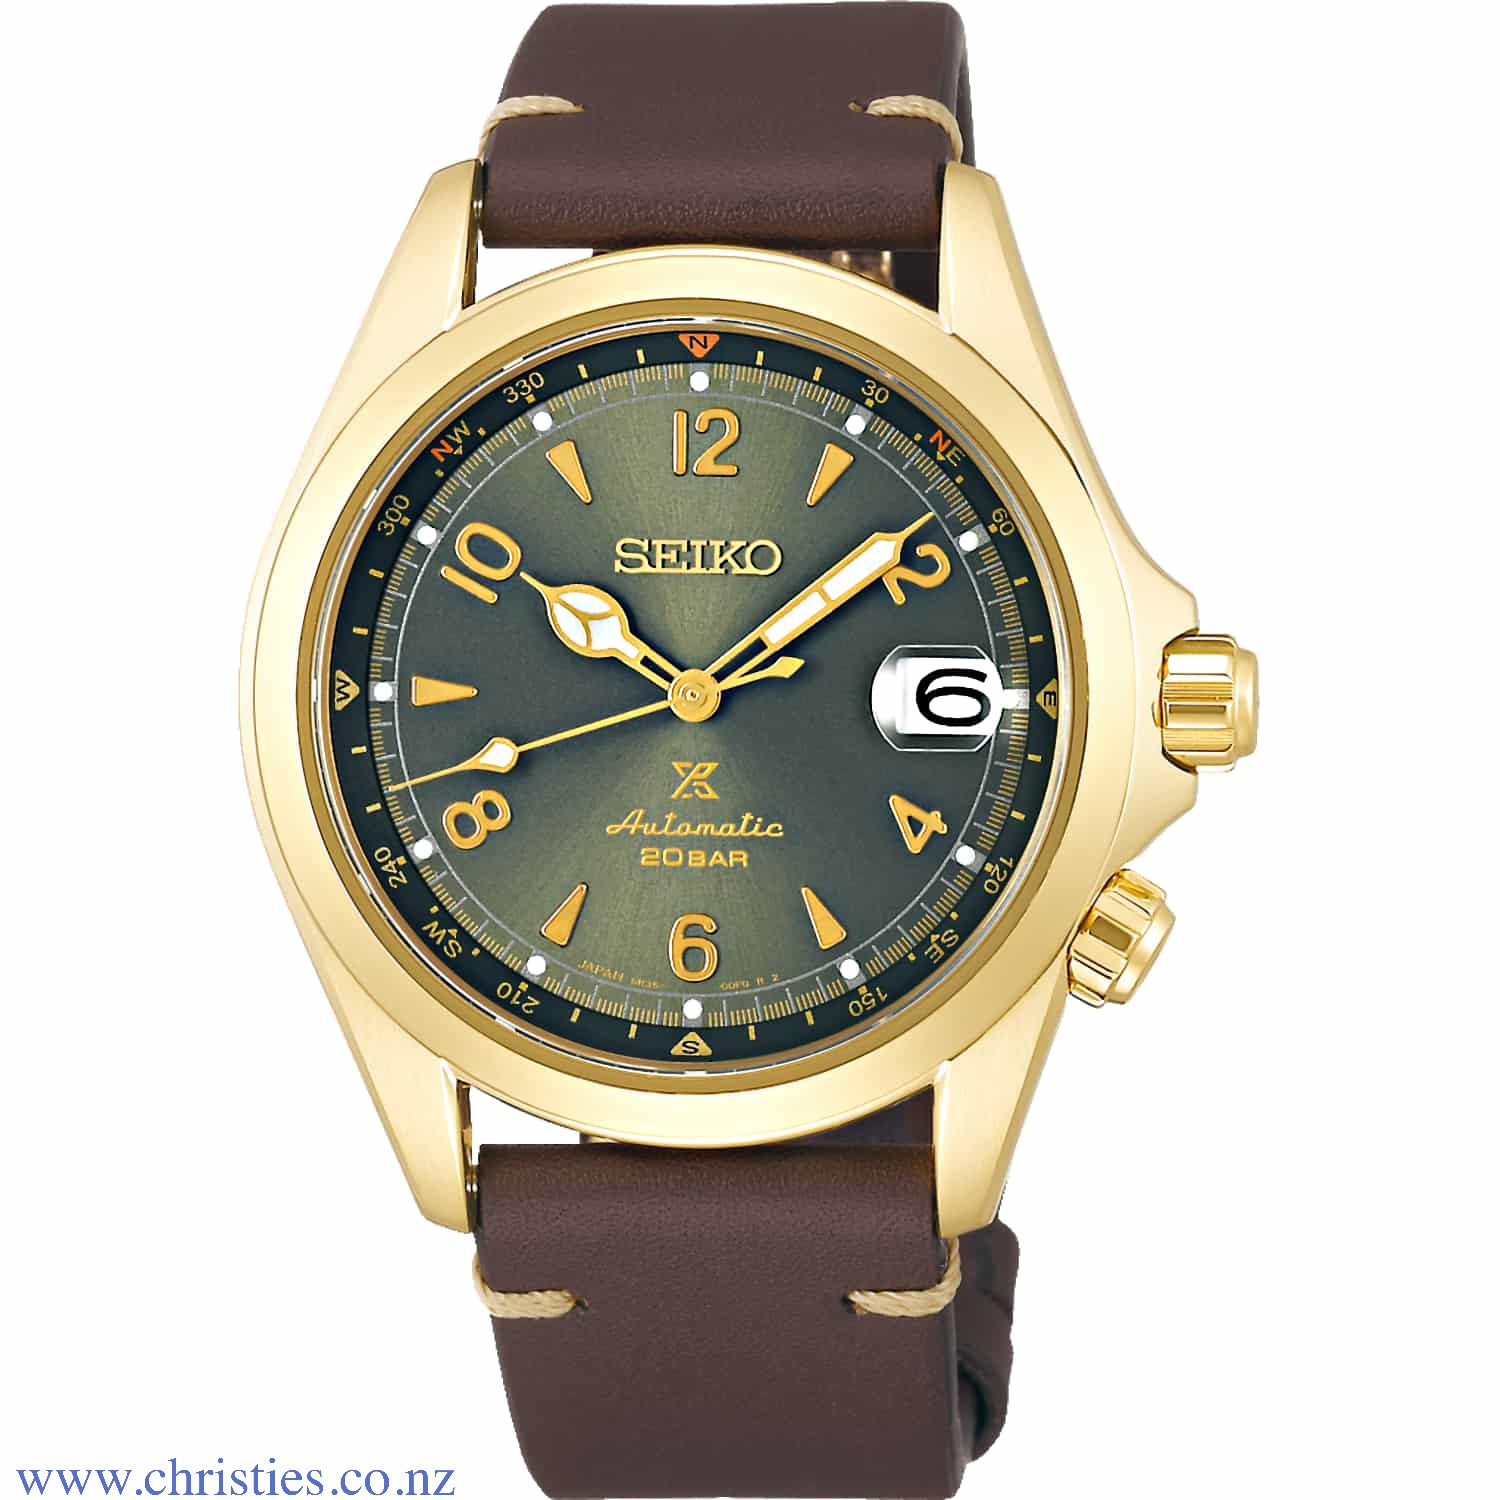 SPB210J SEIKO Prospex Alpinist Automatic Watch. For as long time the Seiko Alpinist has been a Seiko favourite. It is an alternative Seiko if you want a sports watch that was a bit more refined, and not a diver. LAYBUY - Pay it easy, in 6 weekly payments 